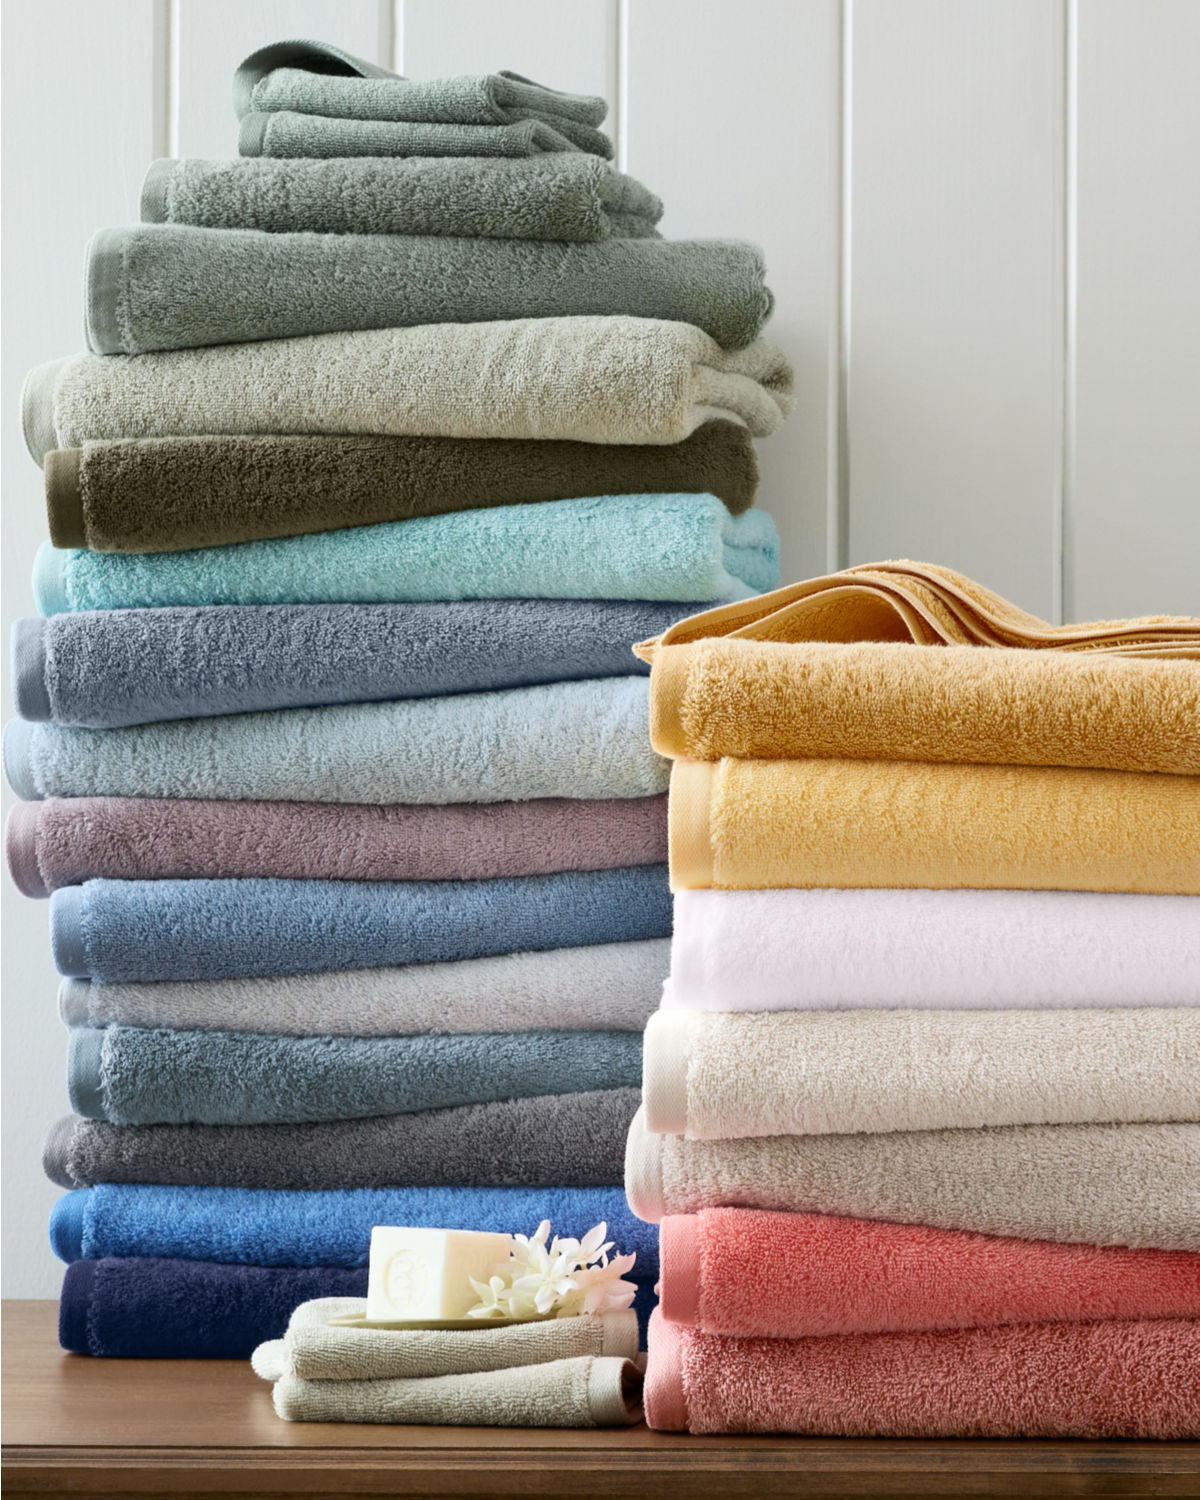 EGYPTIAN COTTON 650GSM TOWELS Range of Sizes & Colours 